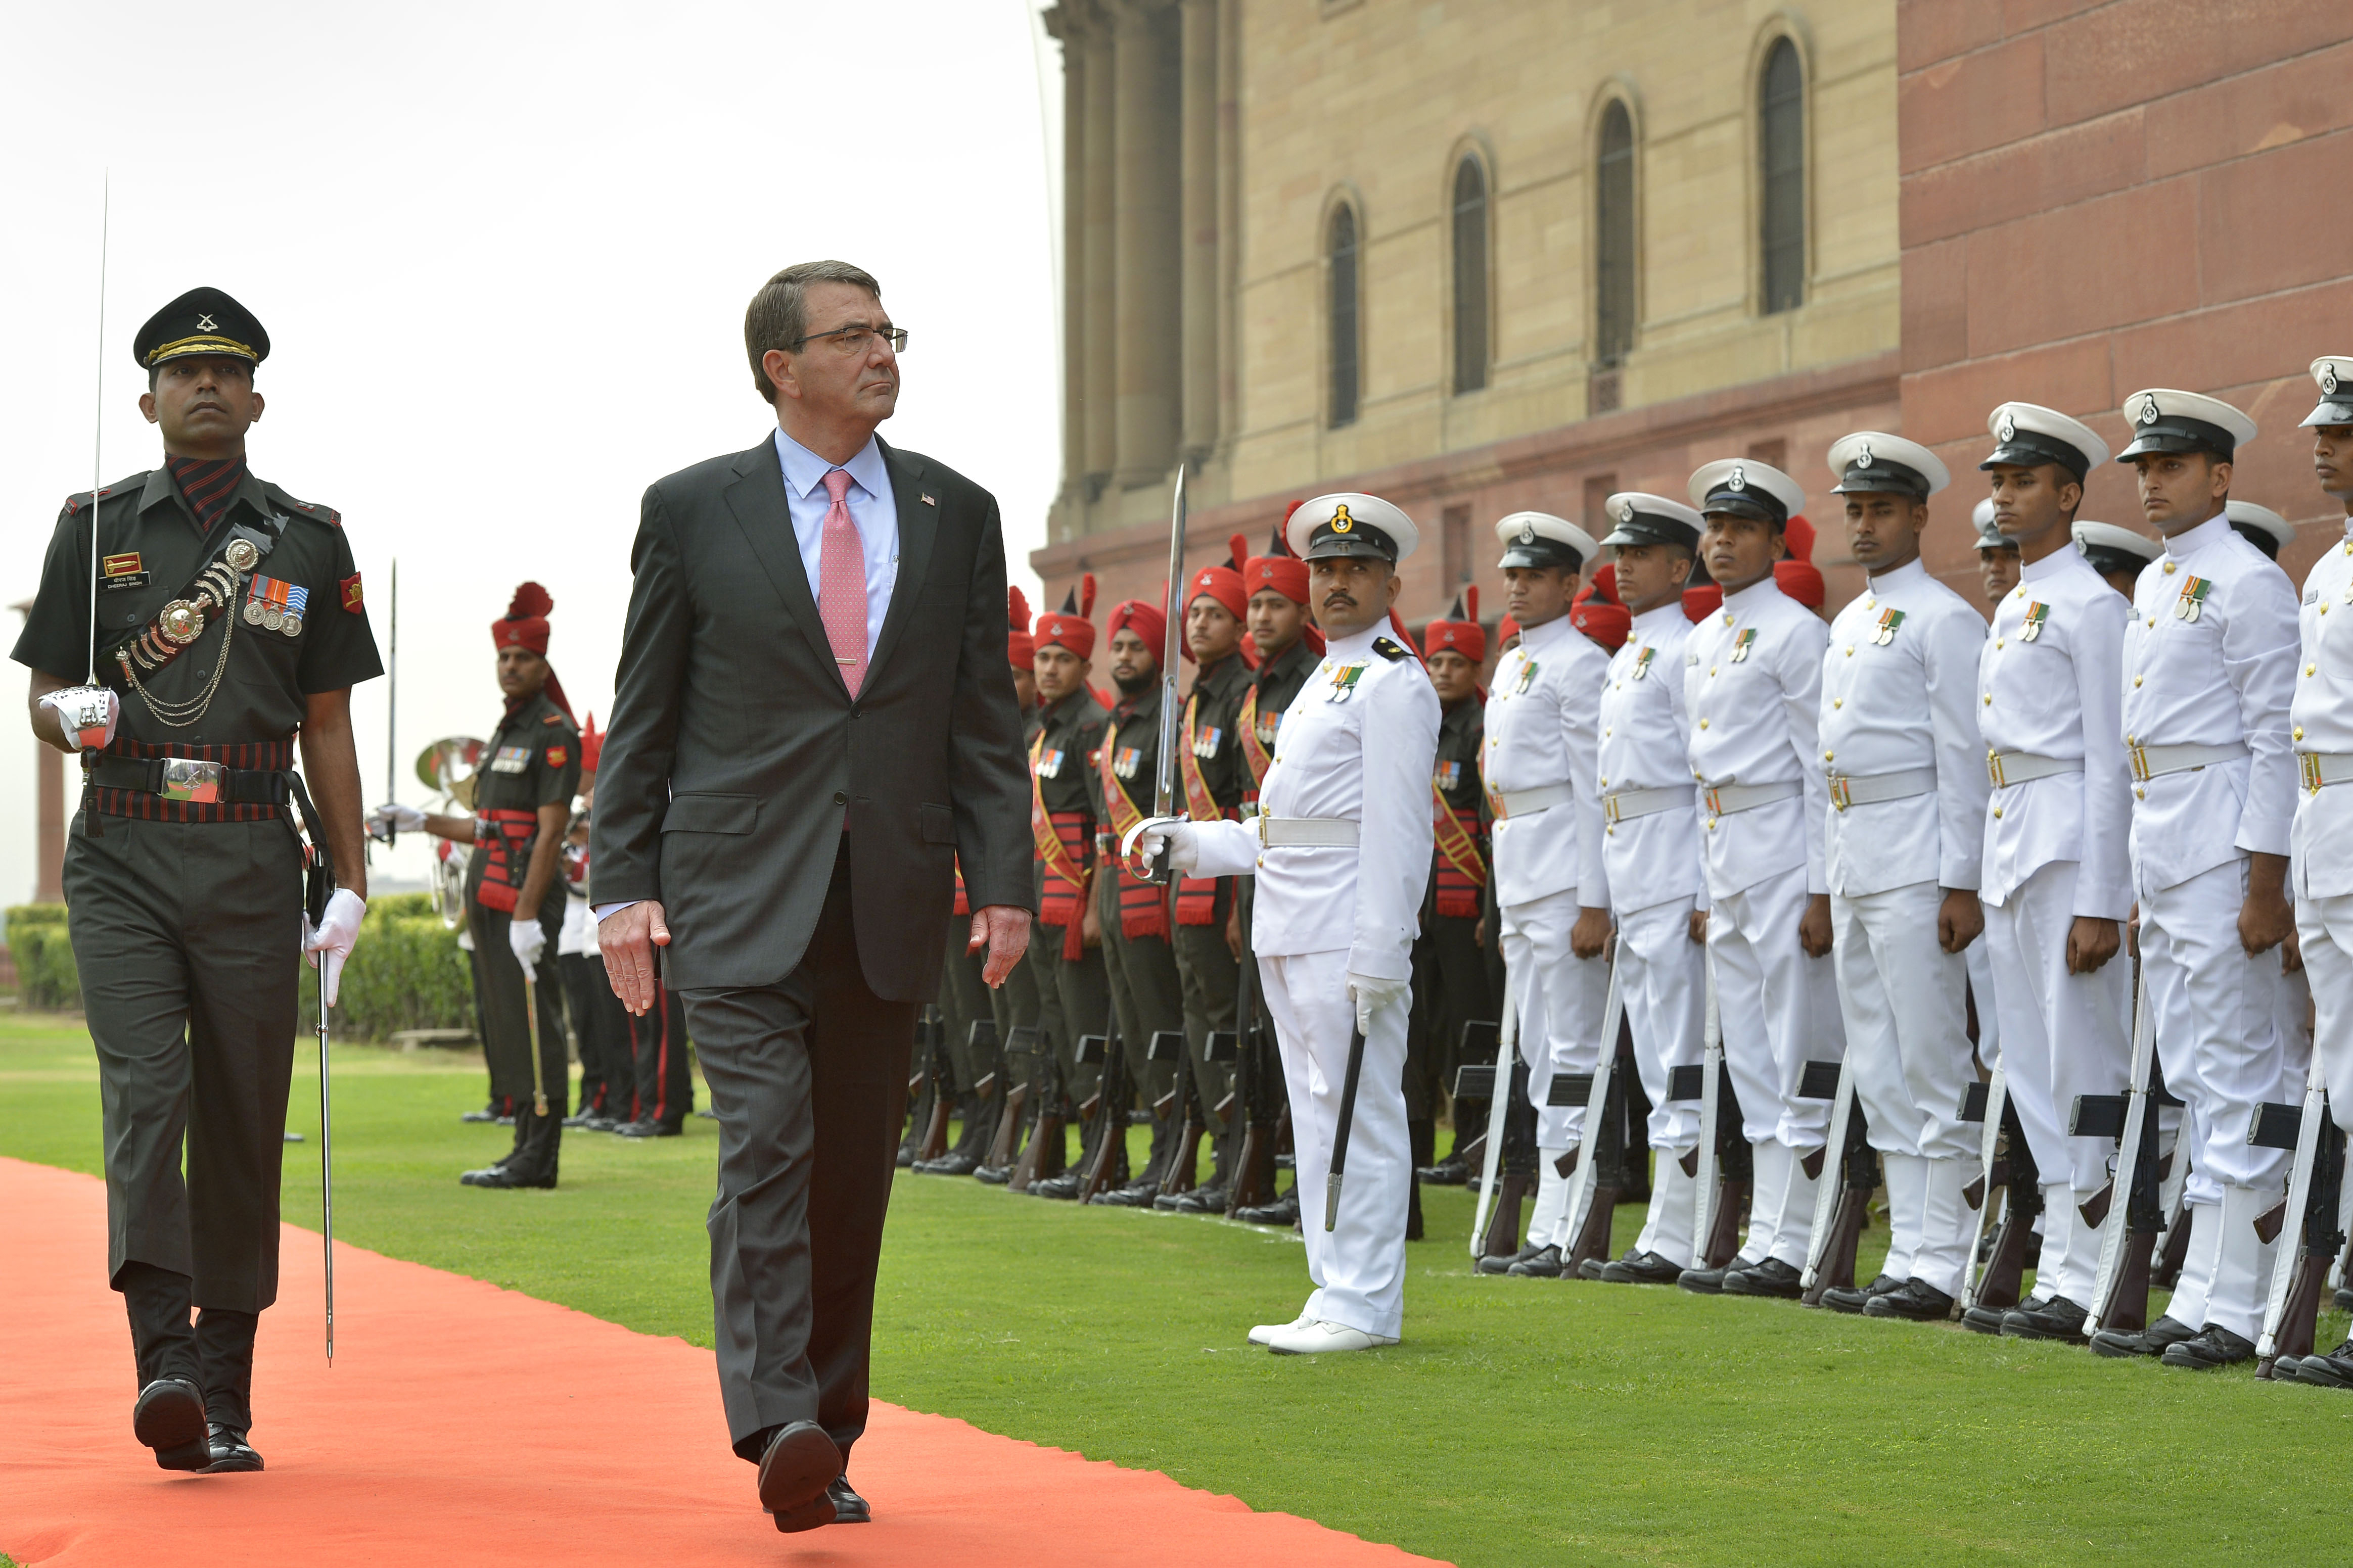 Secretary of Defense Ash Carter is welcomed with an honor cordon to India's Ministry of Defense in New Delhi, india on June 3, 2015. DoD Photo